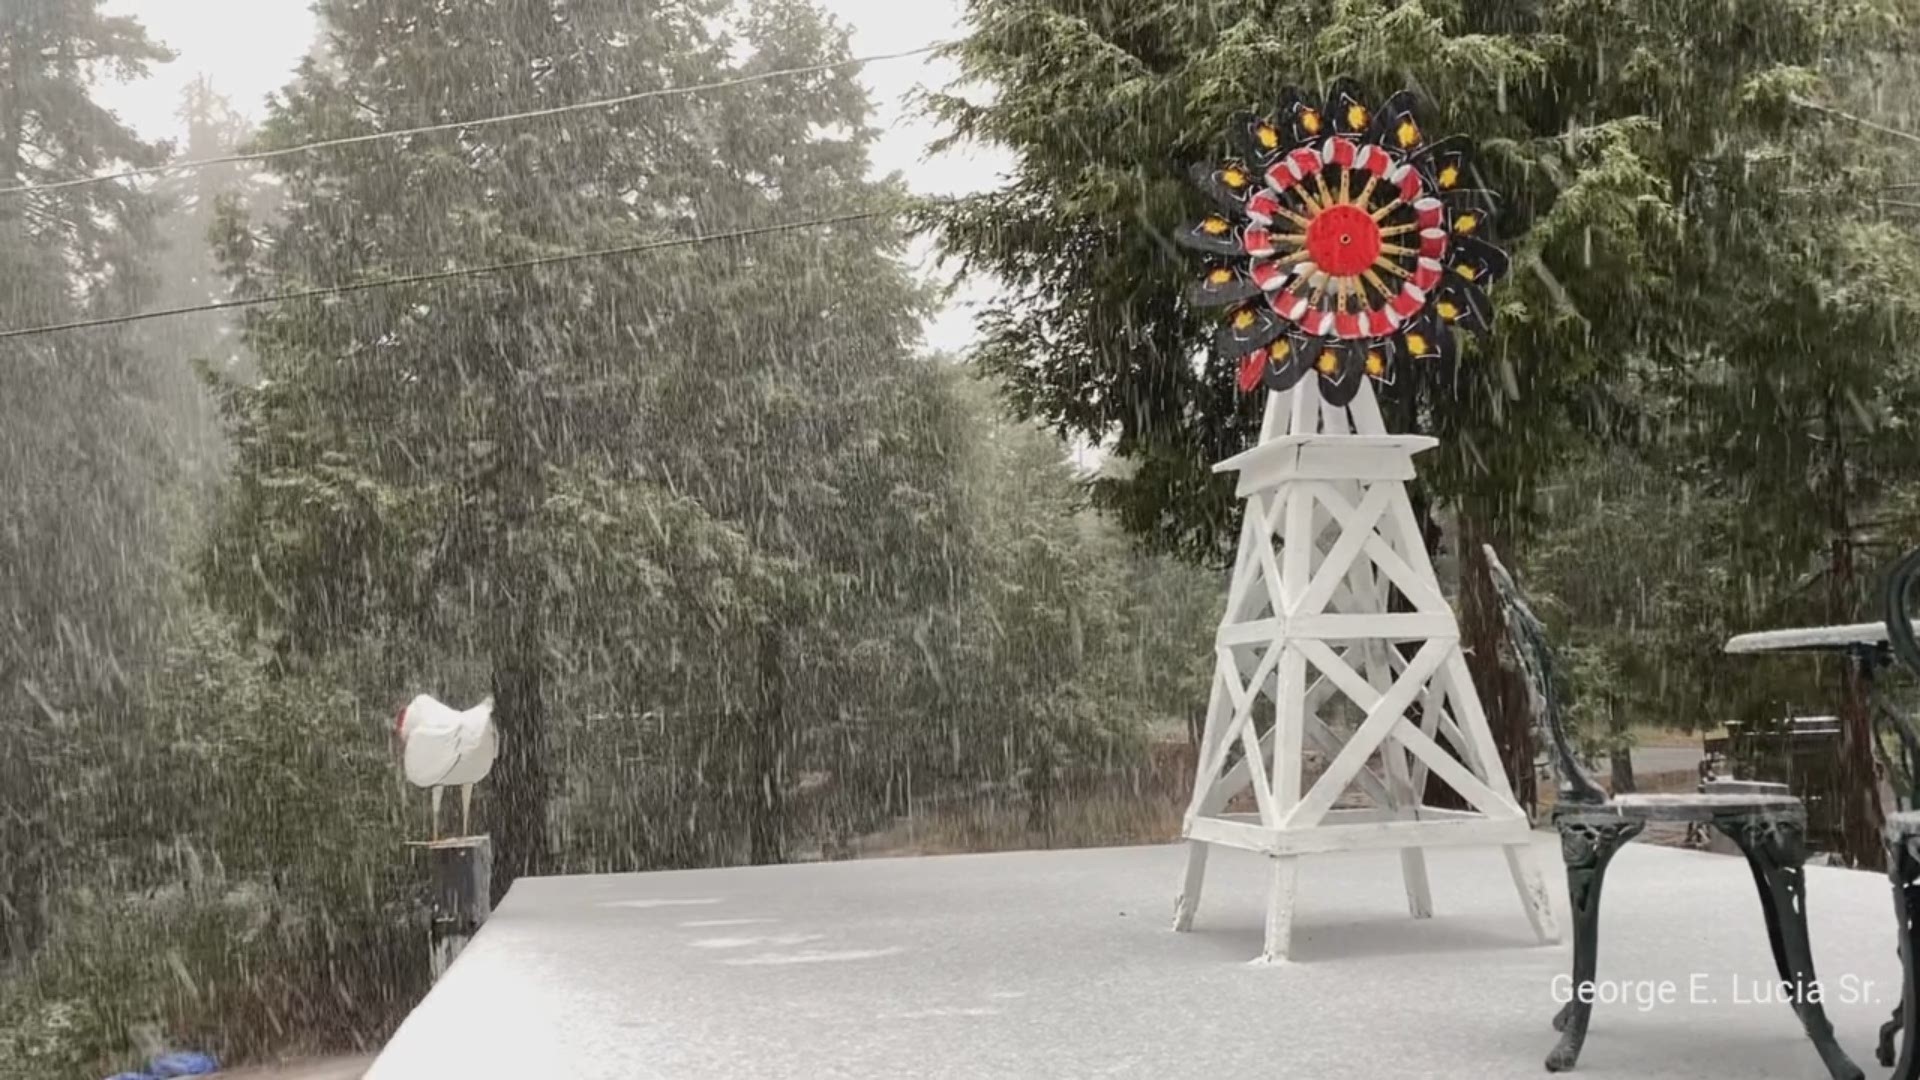 First storm of the season brings snow to Palomar Mountain.